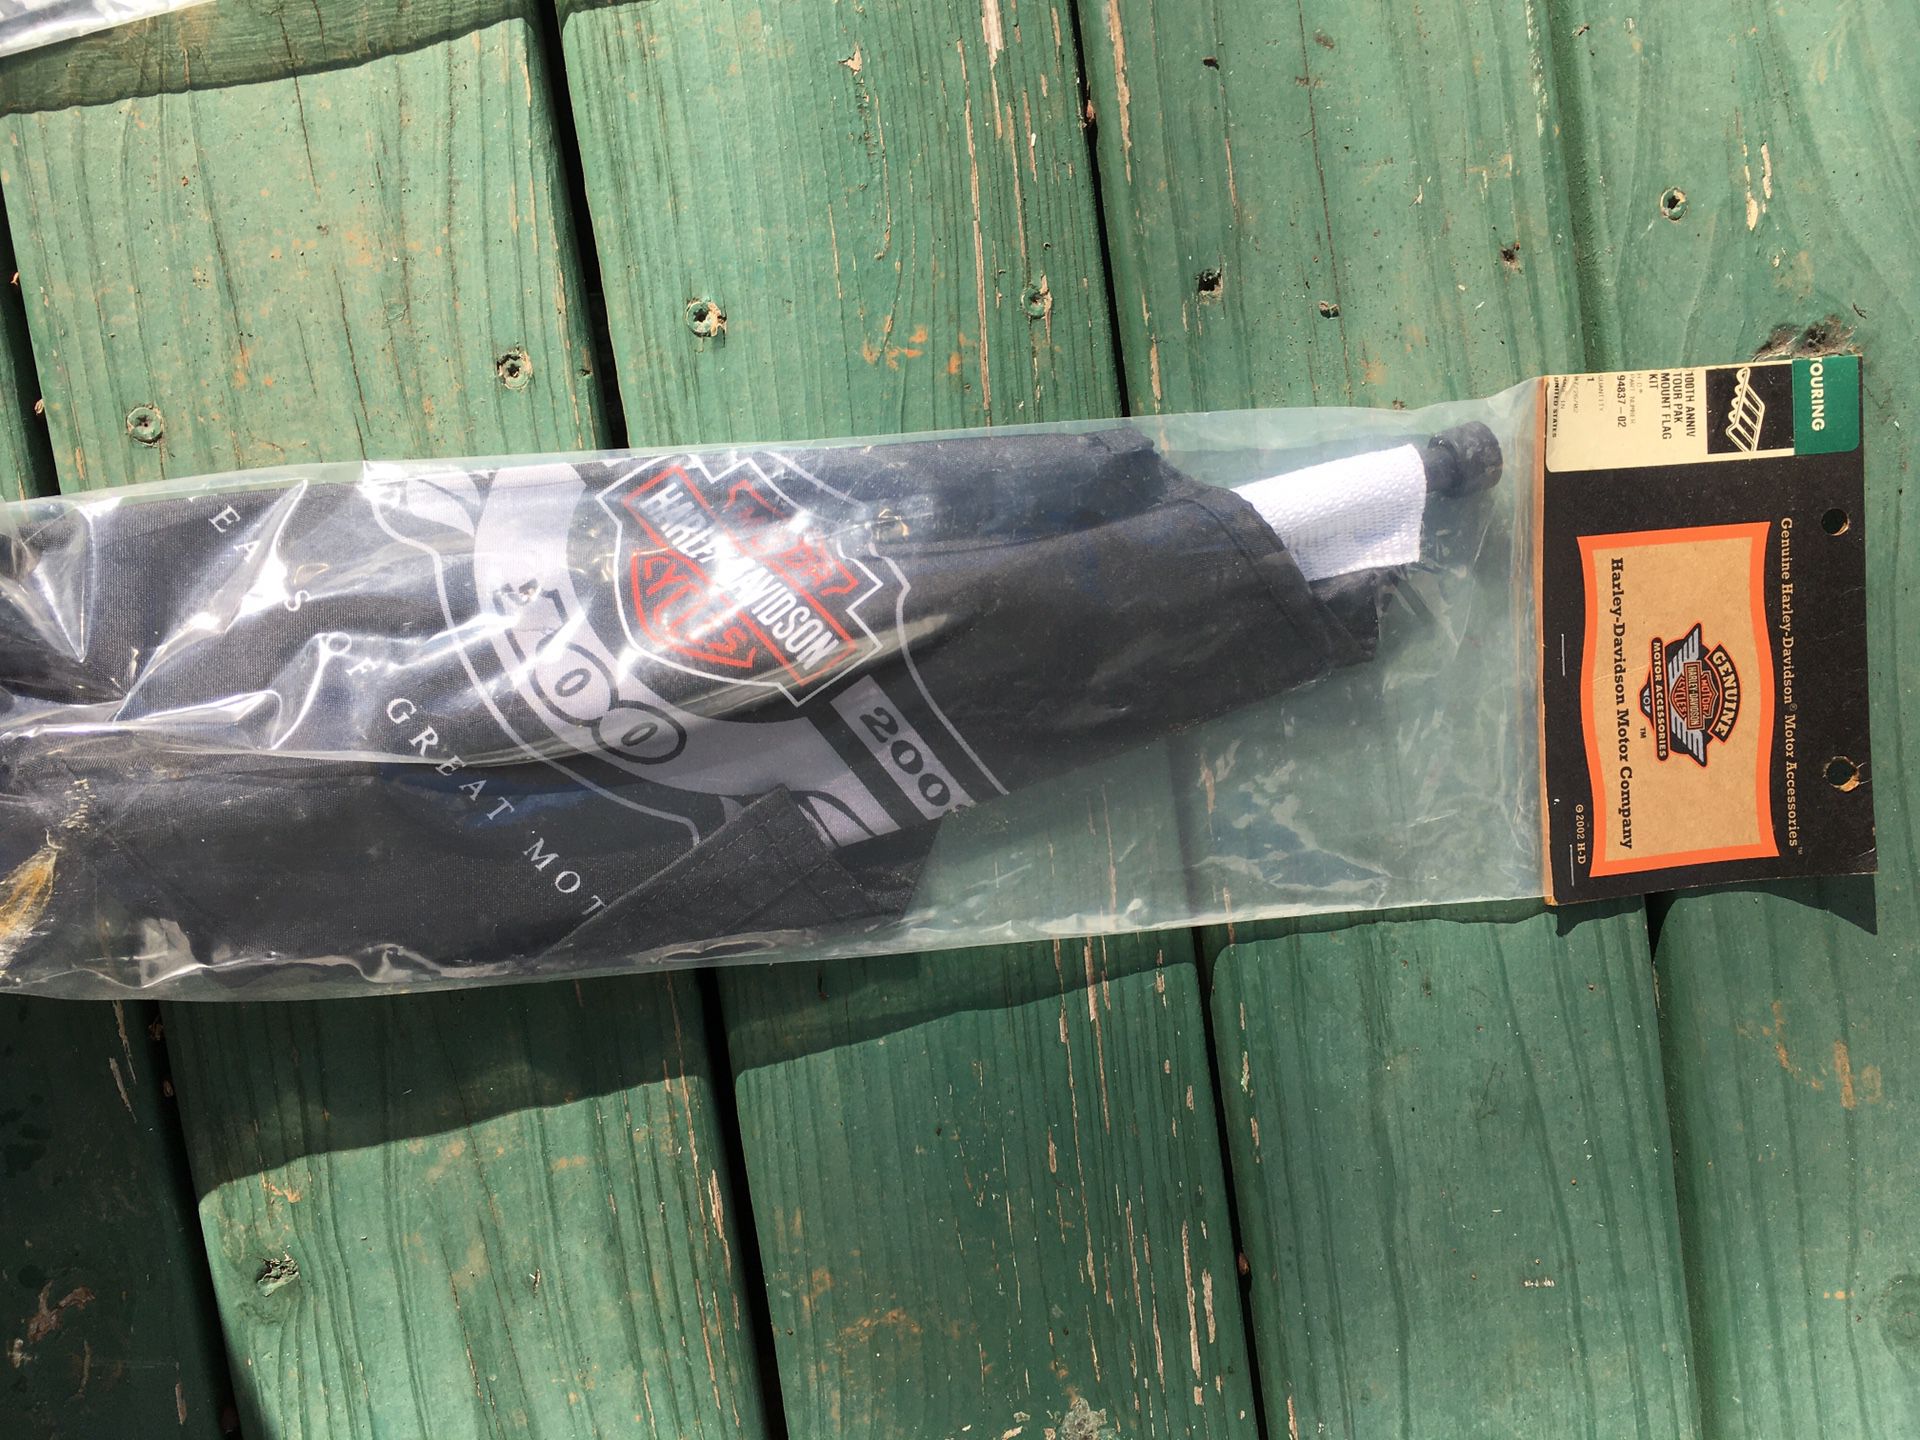 Harley Davidson 100th anniversary flag. Mounts on the tour pack.